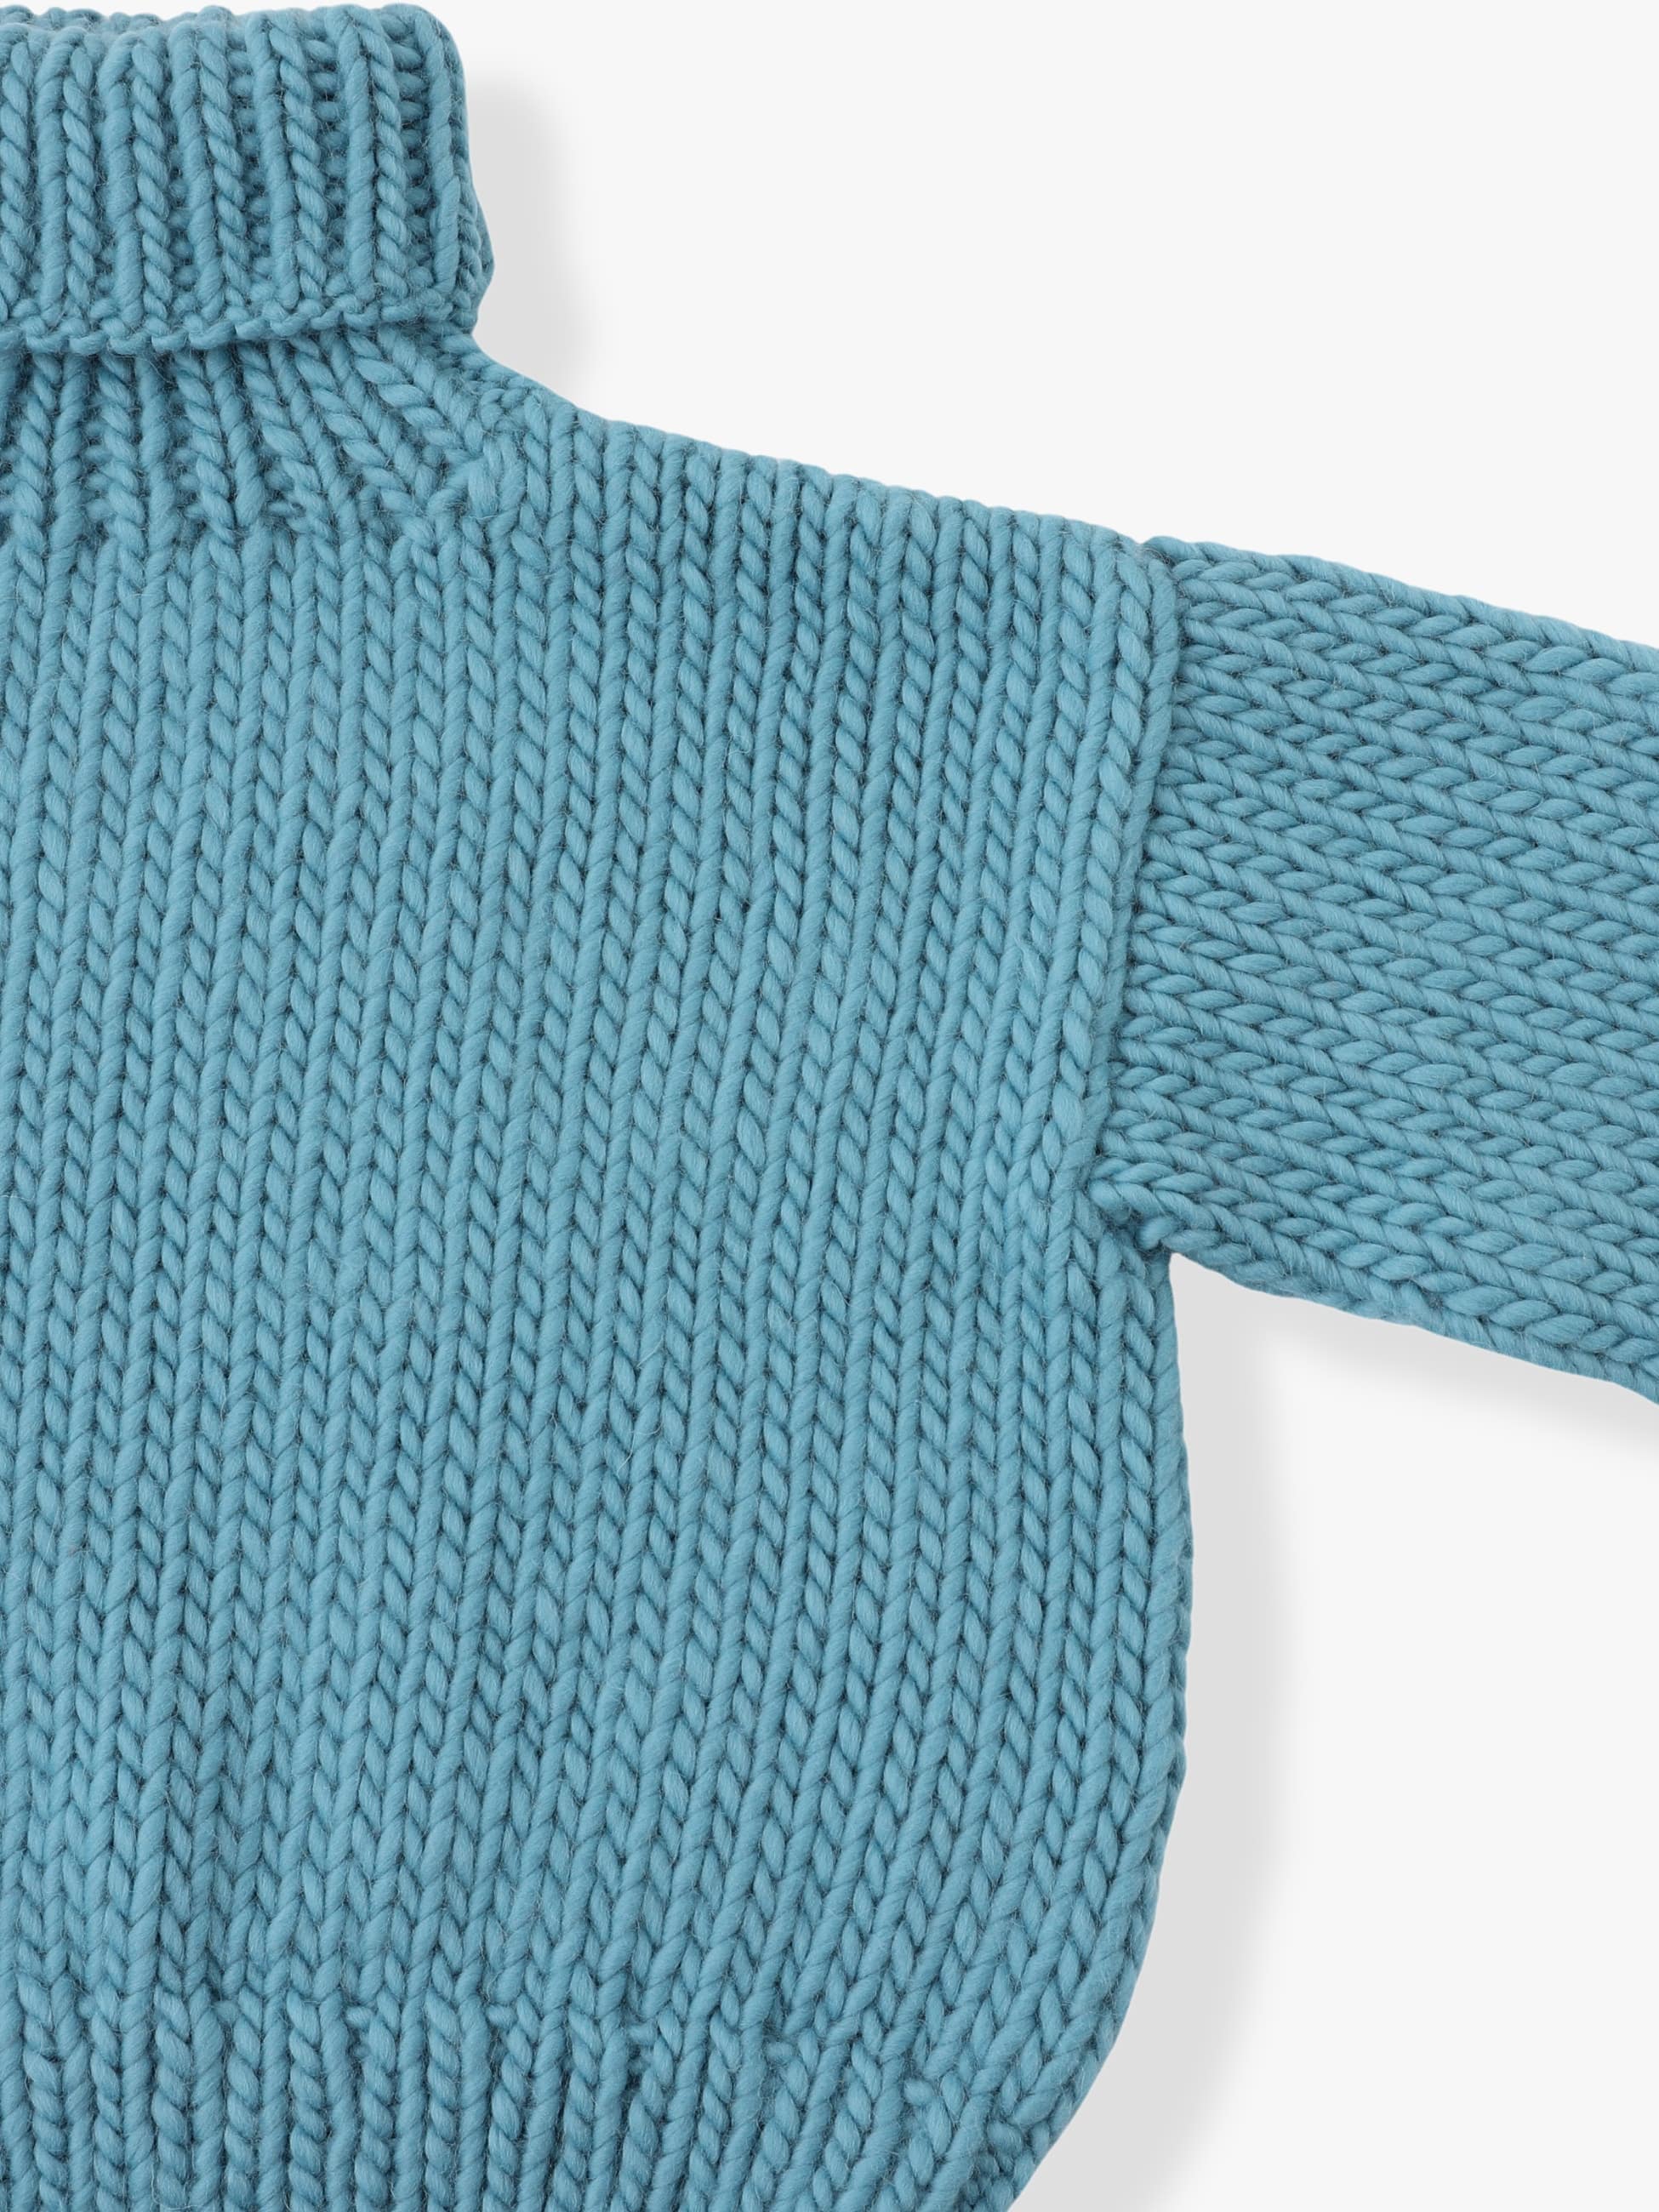 Cropped High Neck Knit Pullover 詳細画像 blue 2